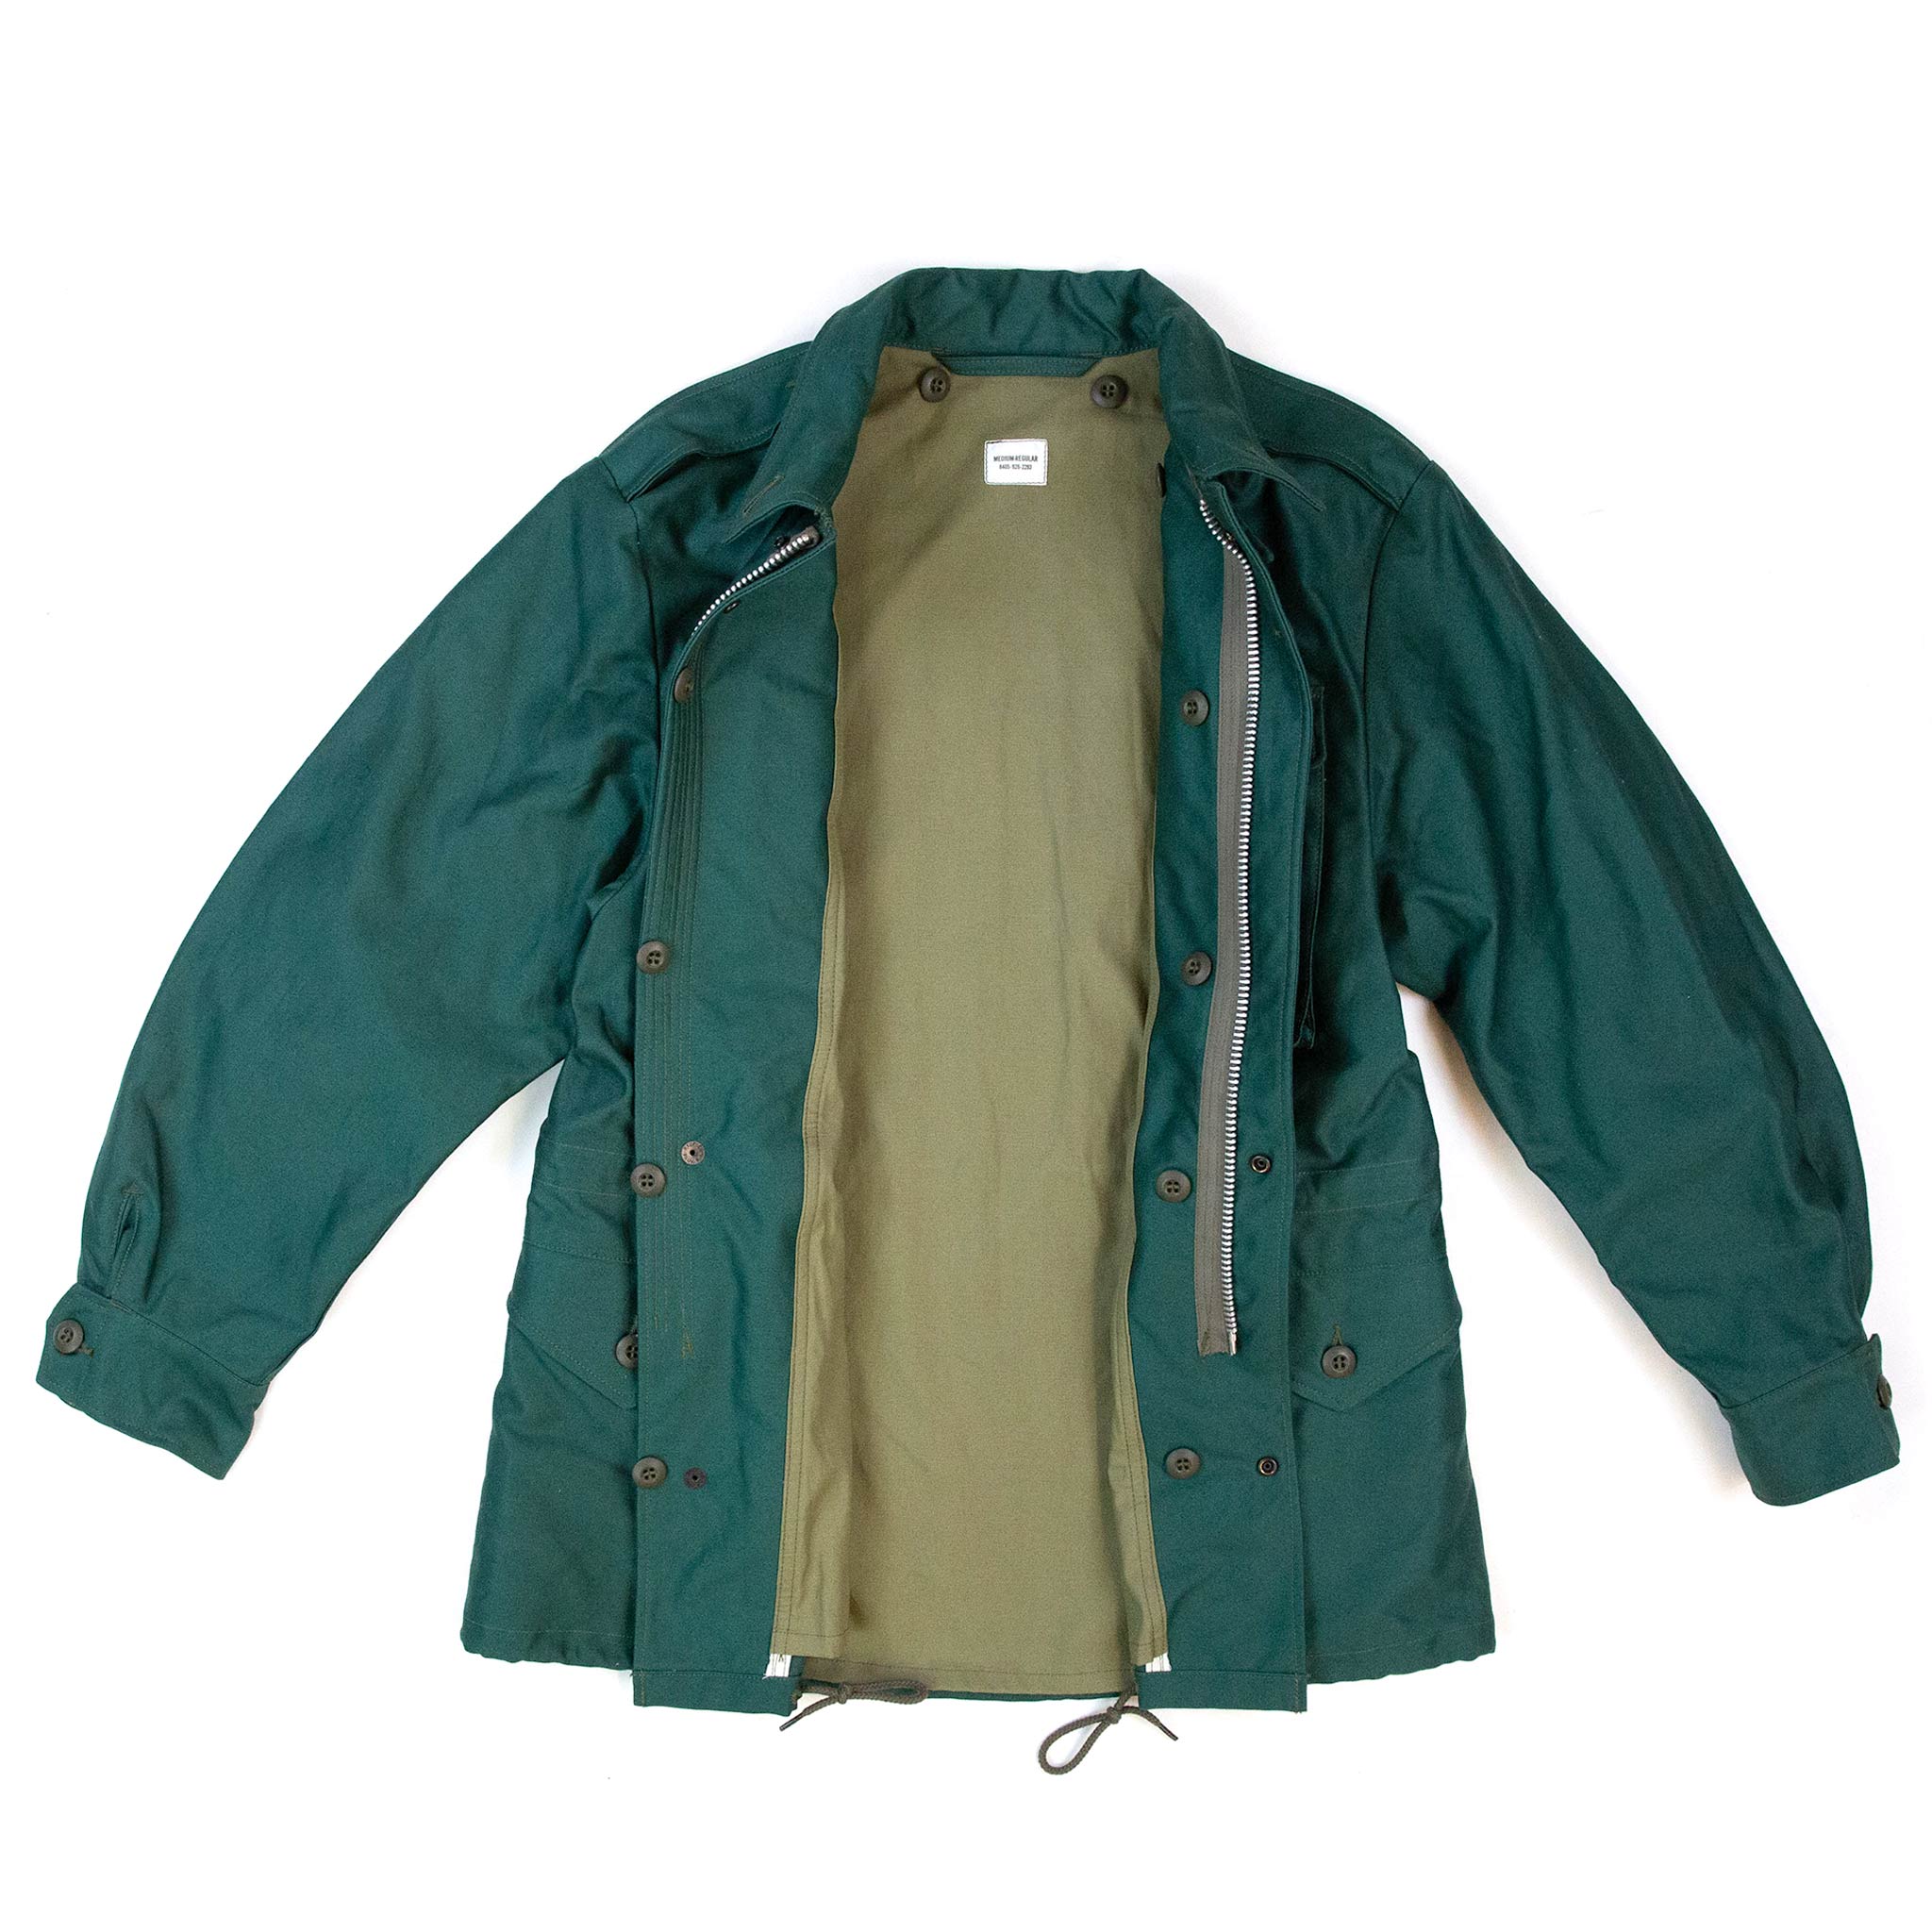 The Real McCoy's MJ21007 Coat, Man's, Cotton Wind Resistant Aggressor Green Open